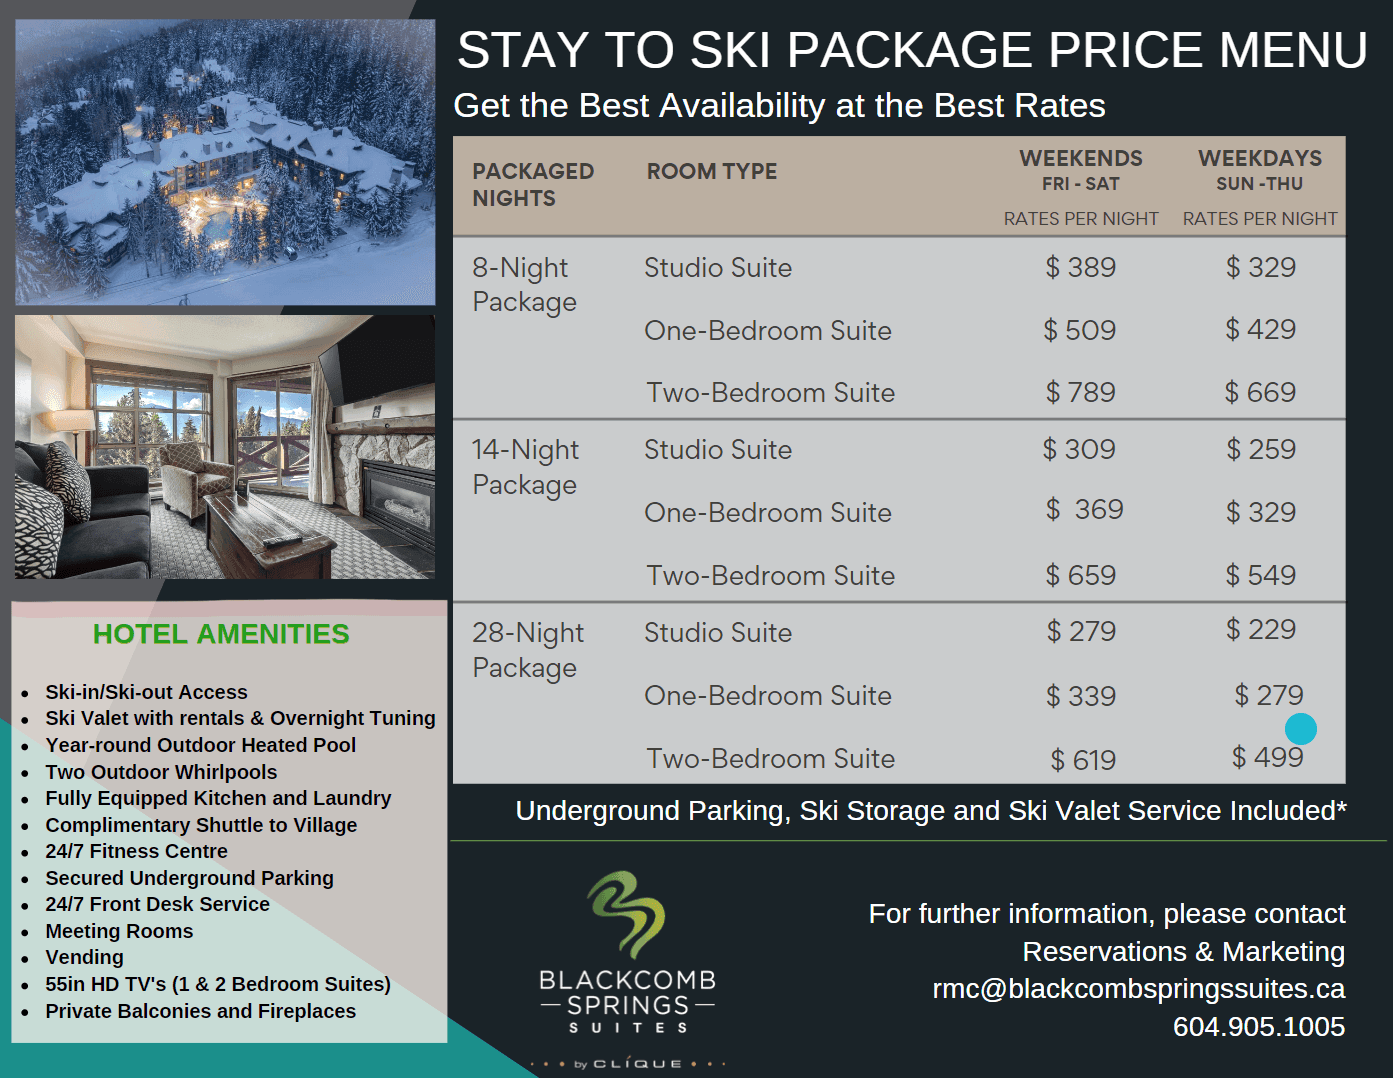 Stay to Ski Accommodation Package price menu at Blackcomb Springs Suites